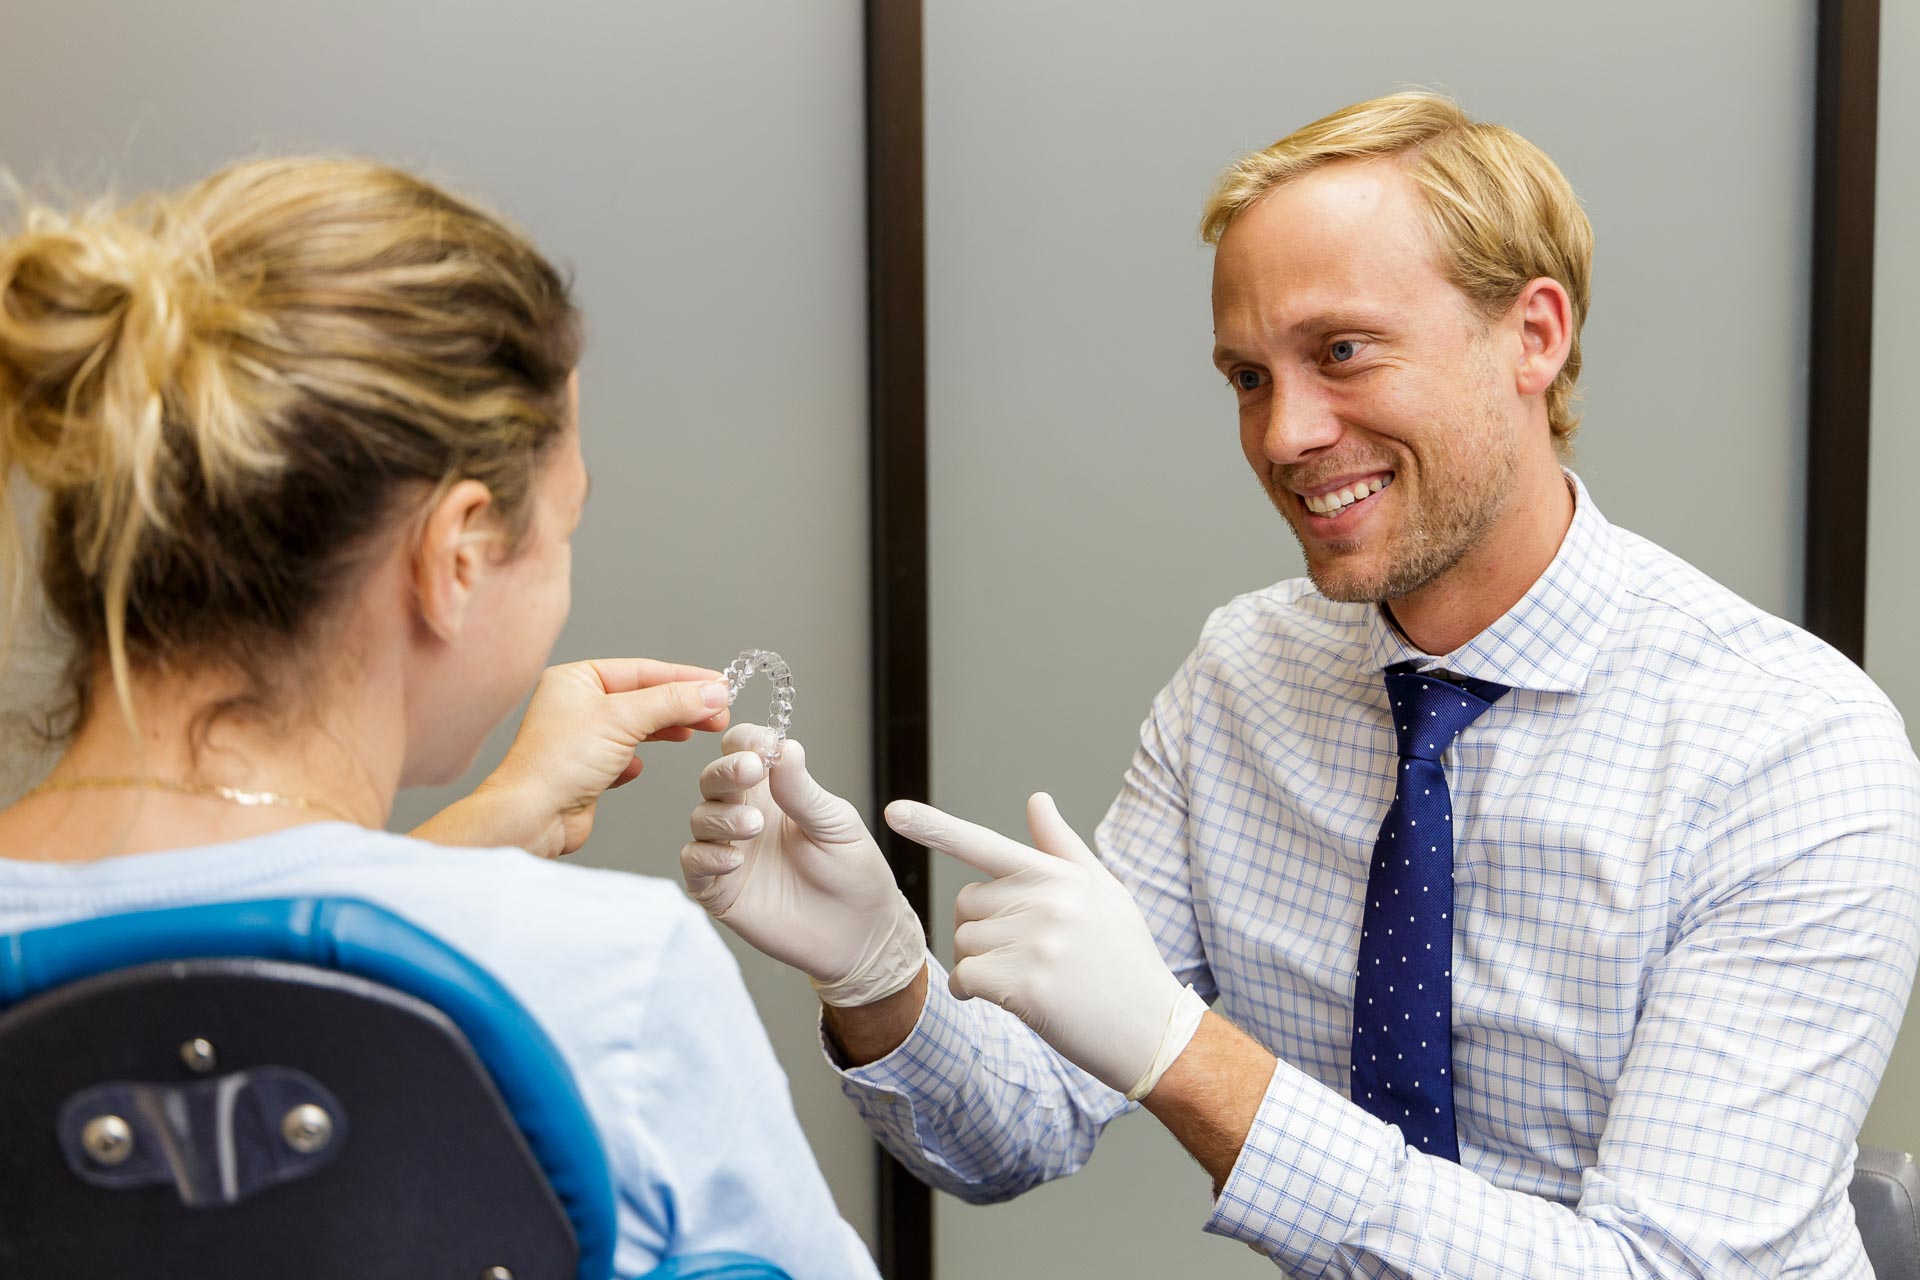 An orthodontist showing a patient their Invisalign clear retainer